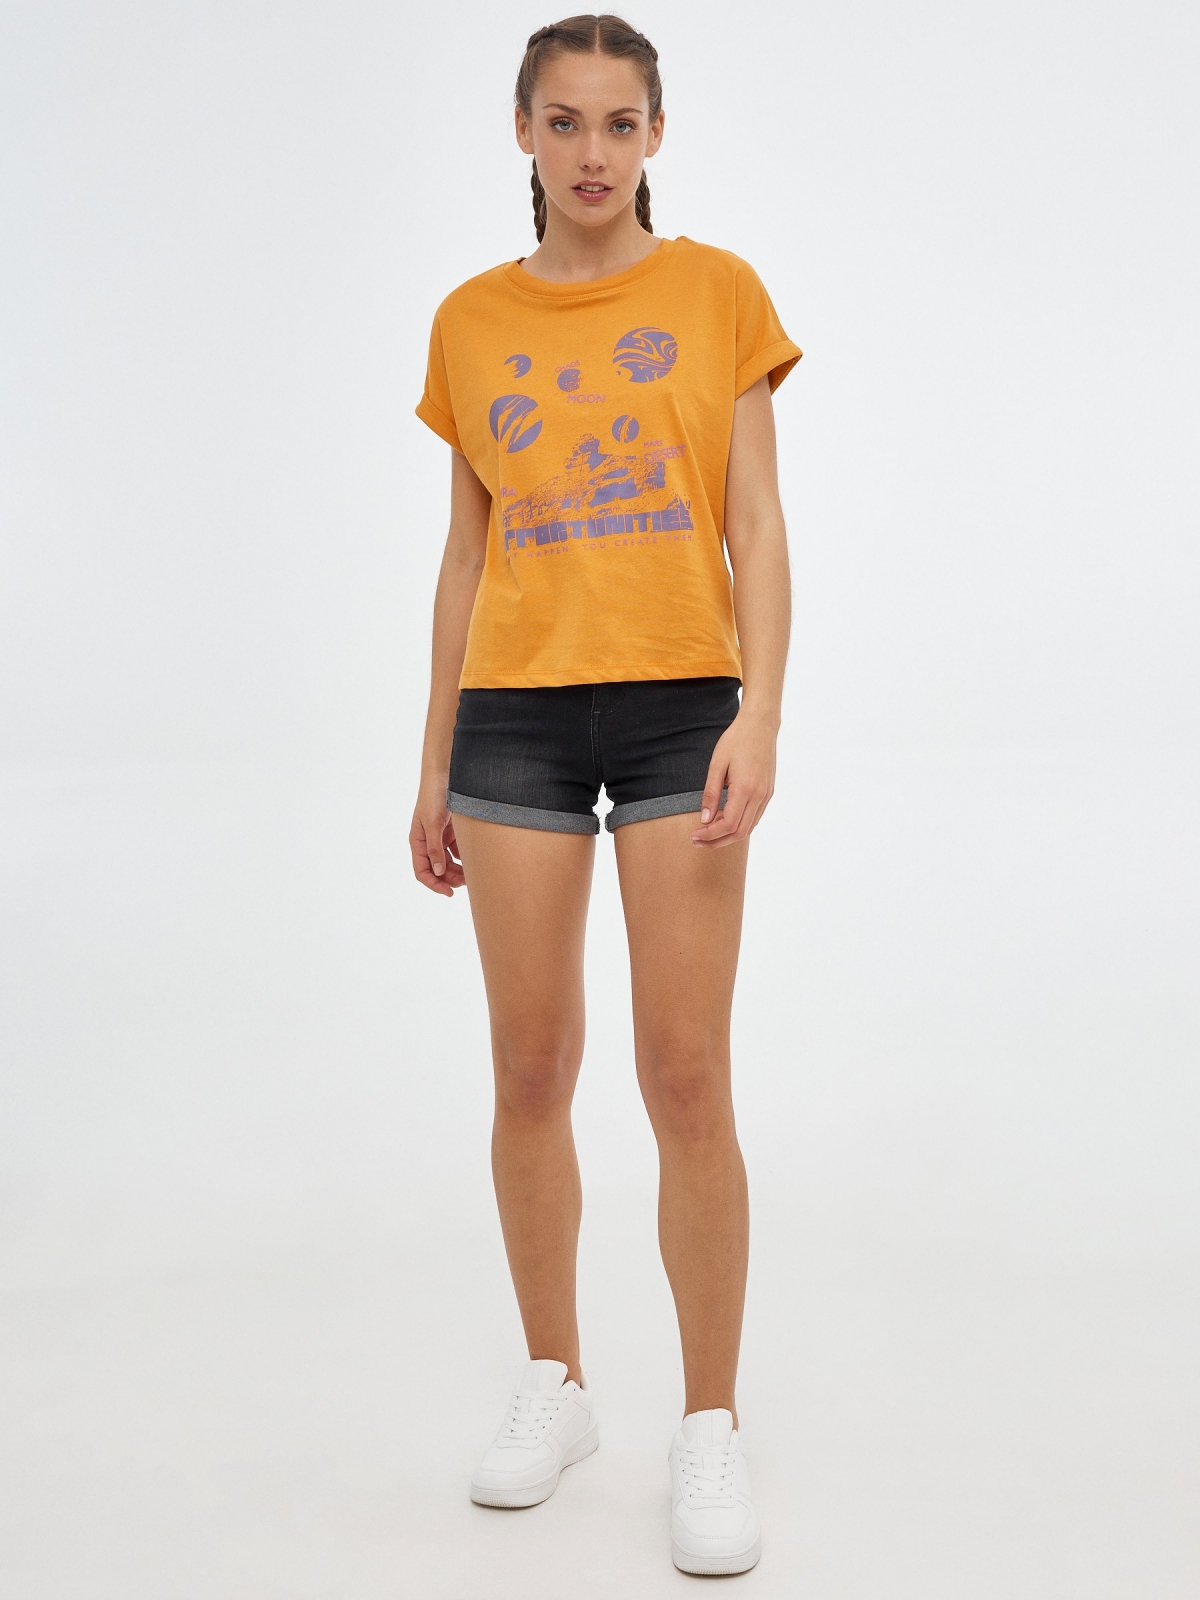 Planets print t-shirt ochre front view